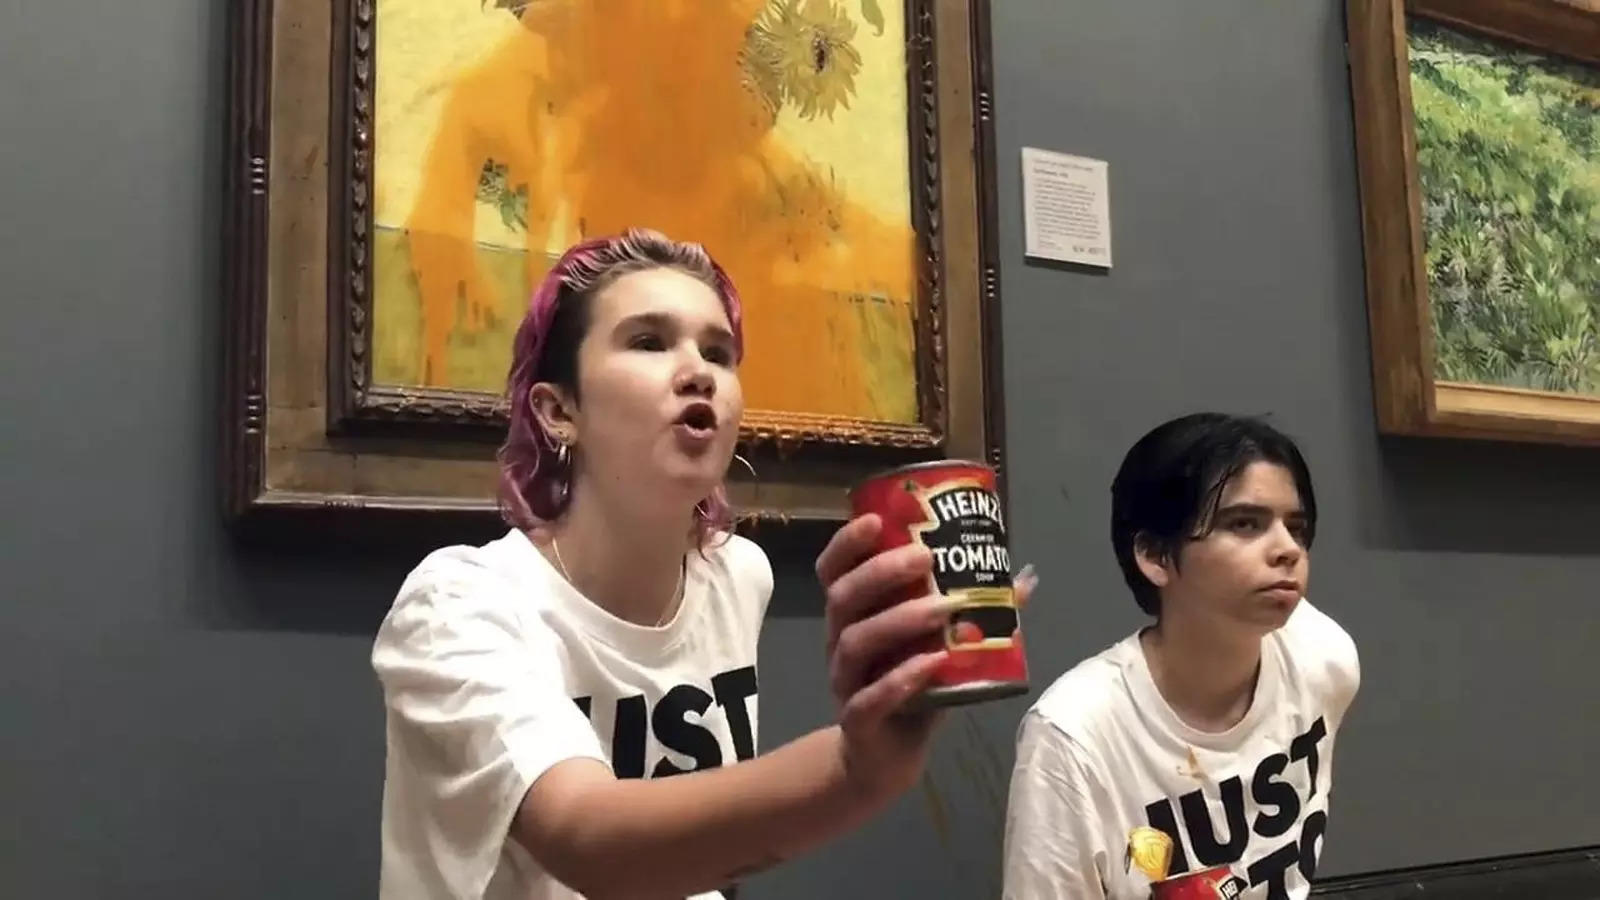 The two protesters who have thrown tinned soup at Vincent Van Gogh's famous 1888 work Sunflowers at the National Gallery in London, Friday. (File photo: AP)